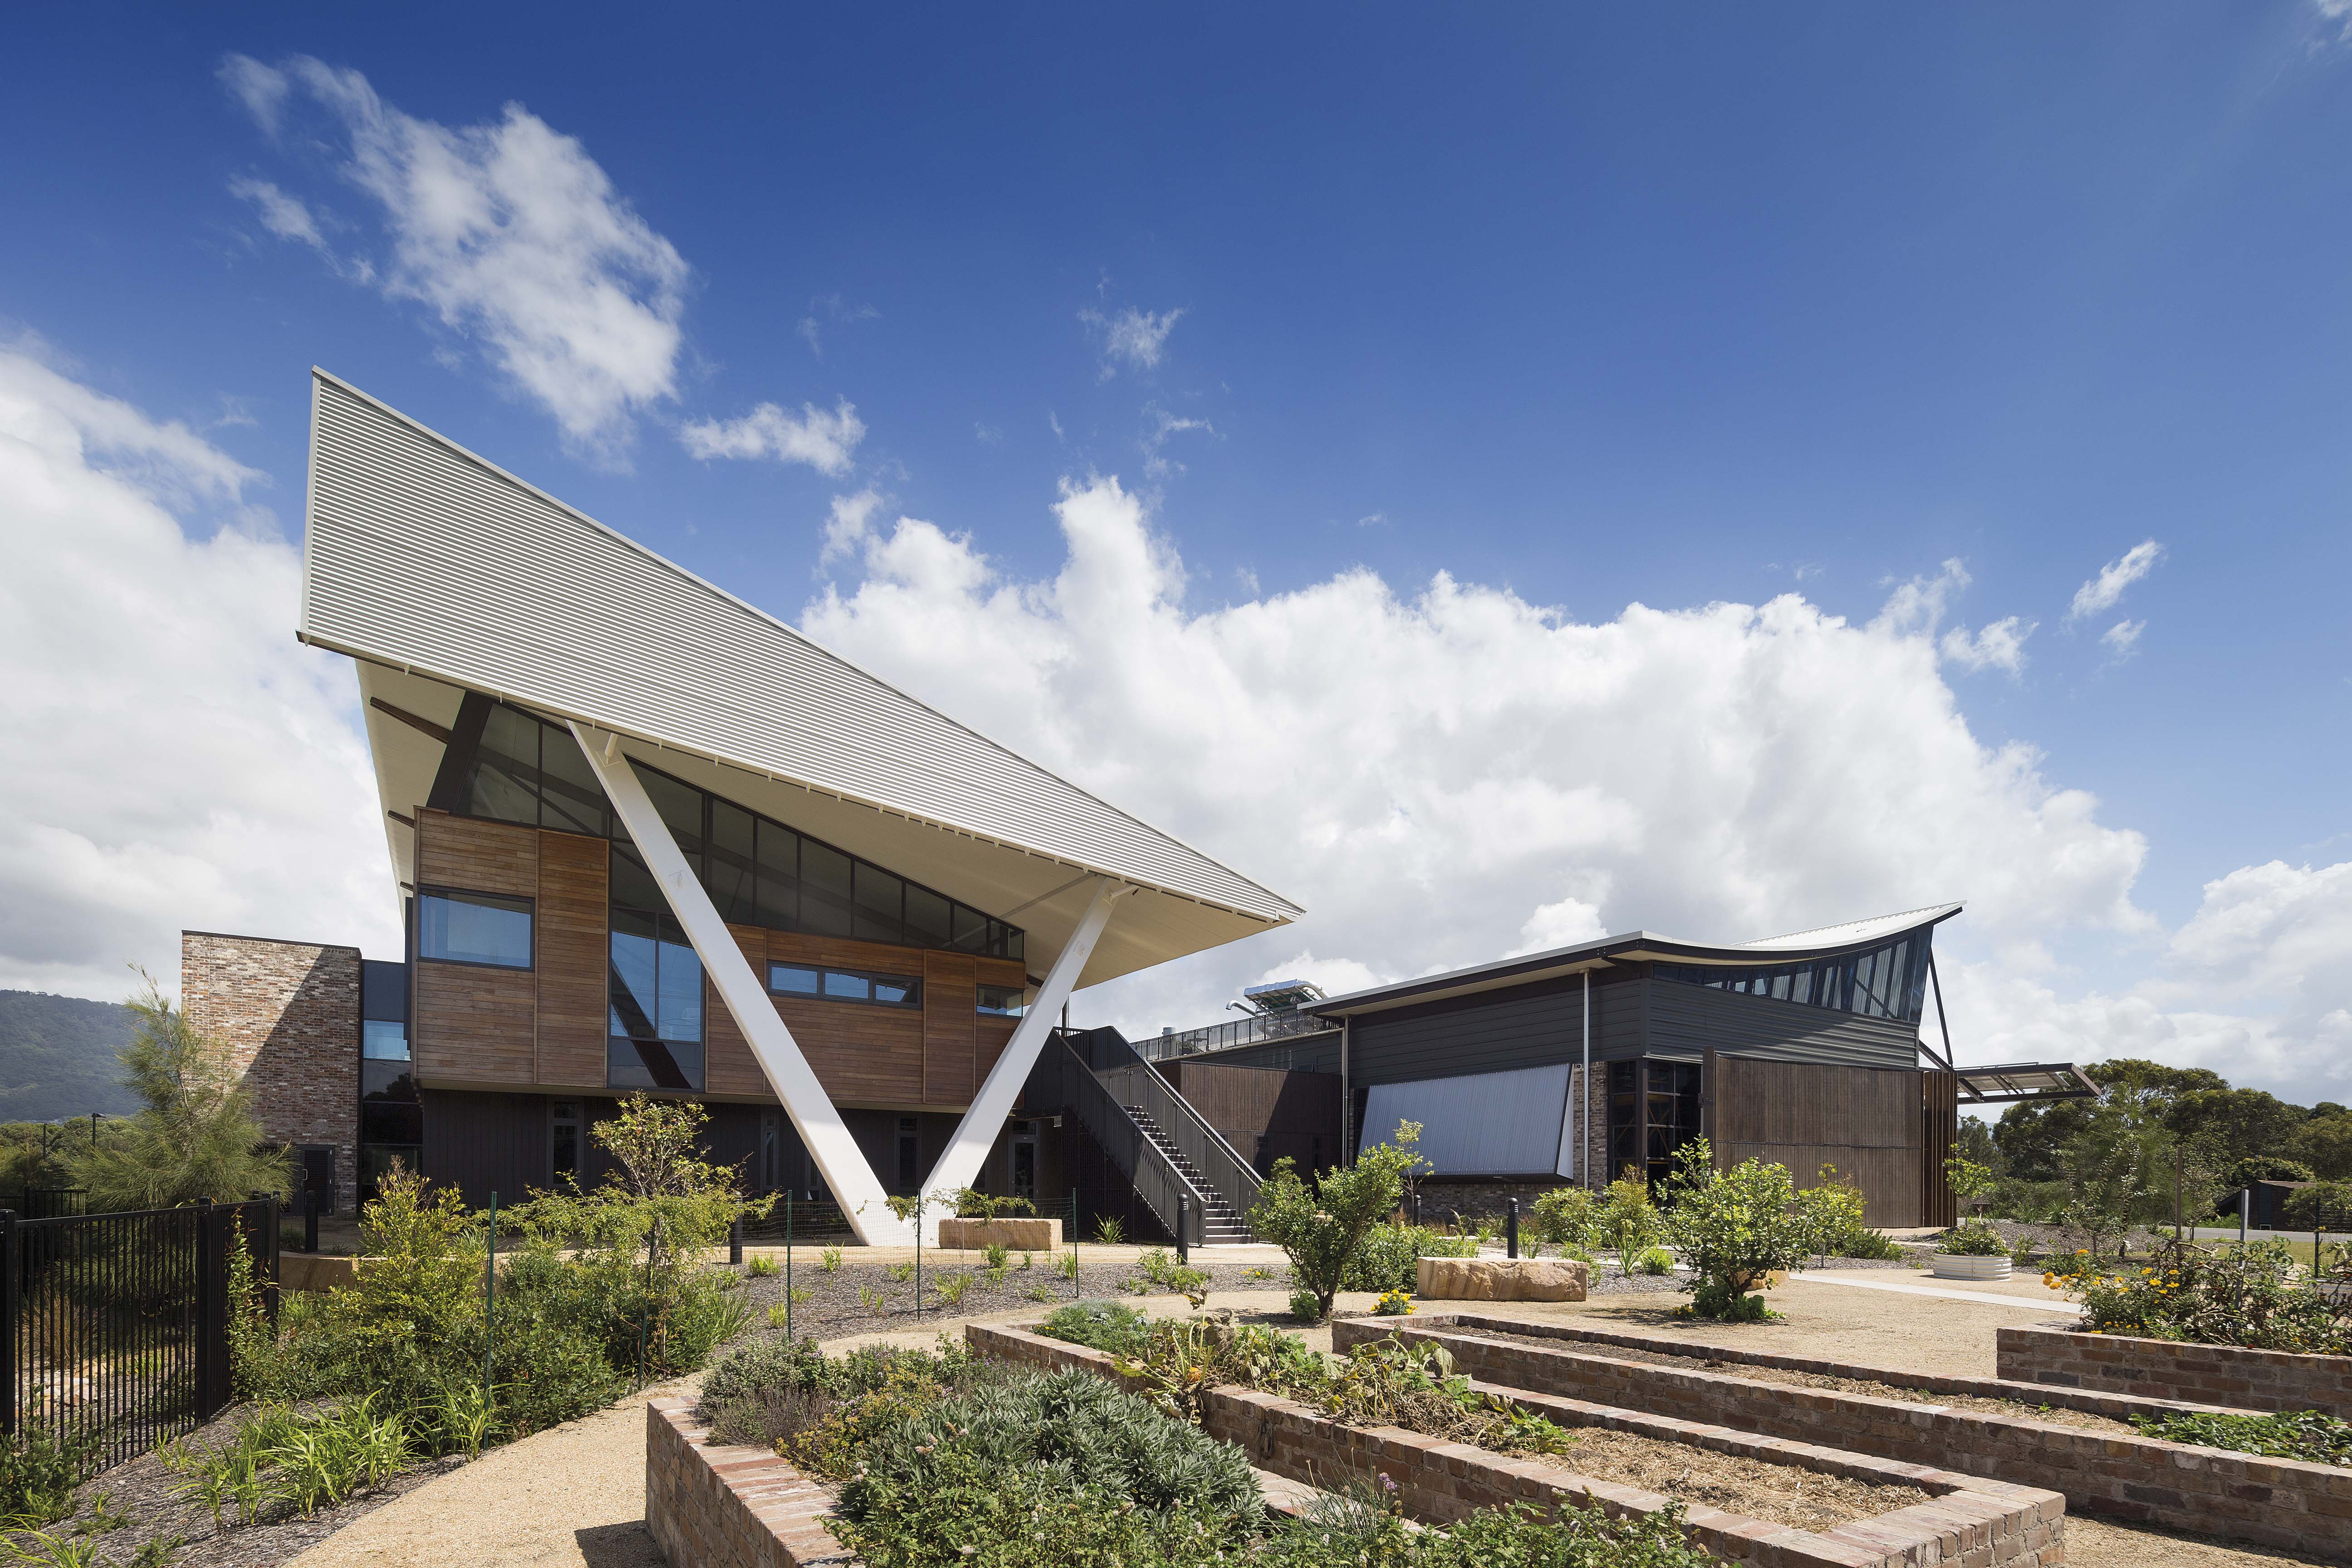 Sustainable Buildings Research Centre. The project was awarded a 6 Star Green Star